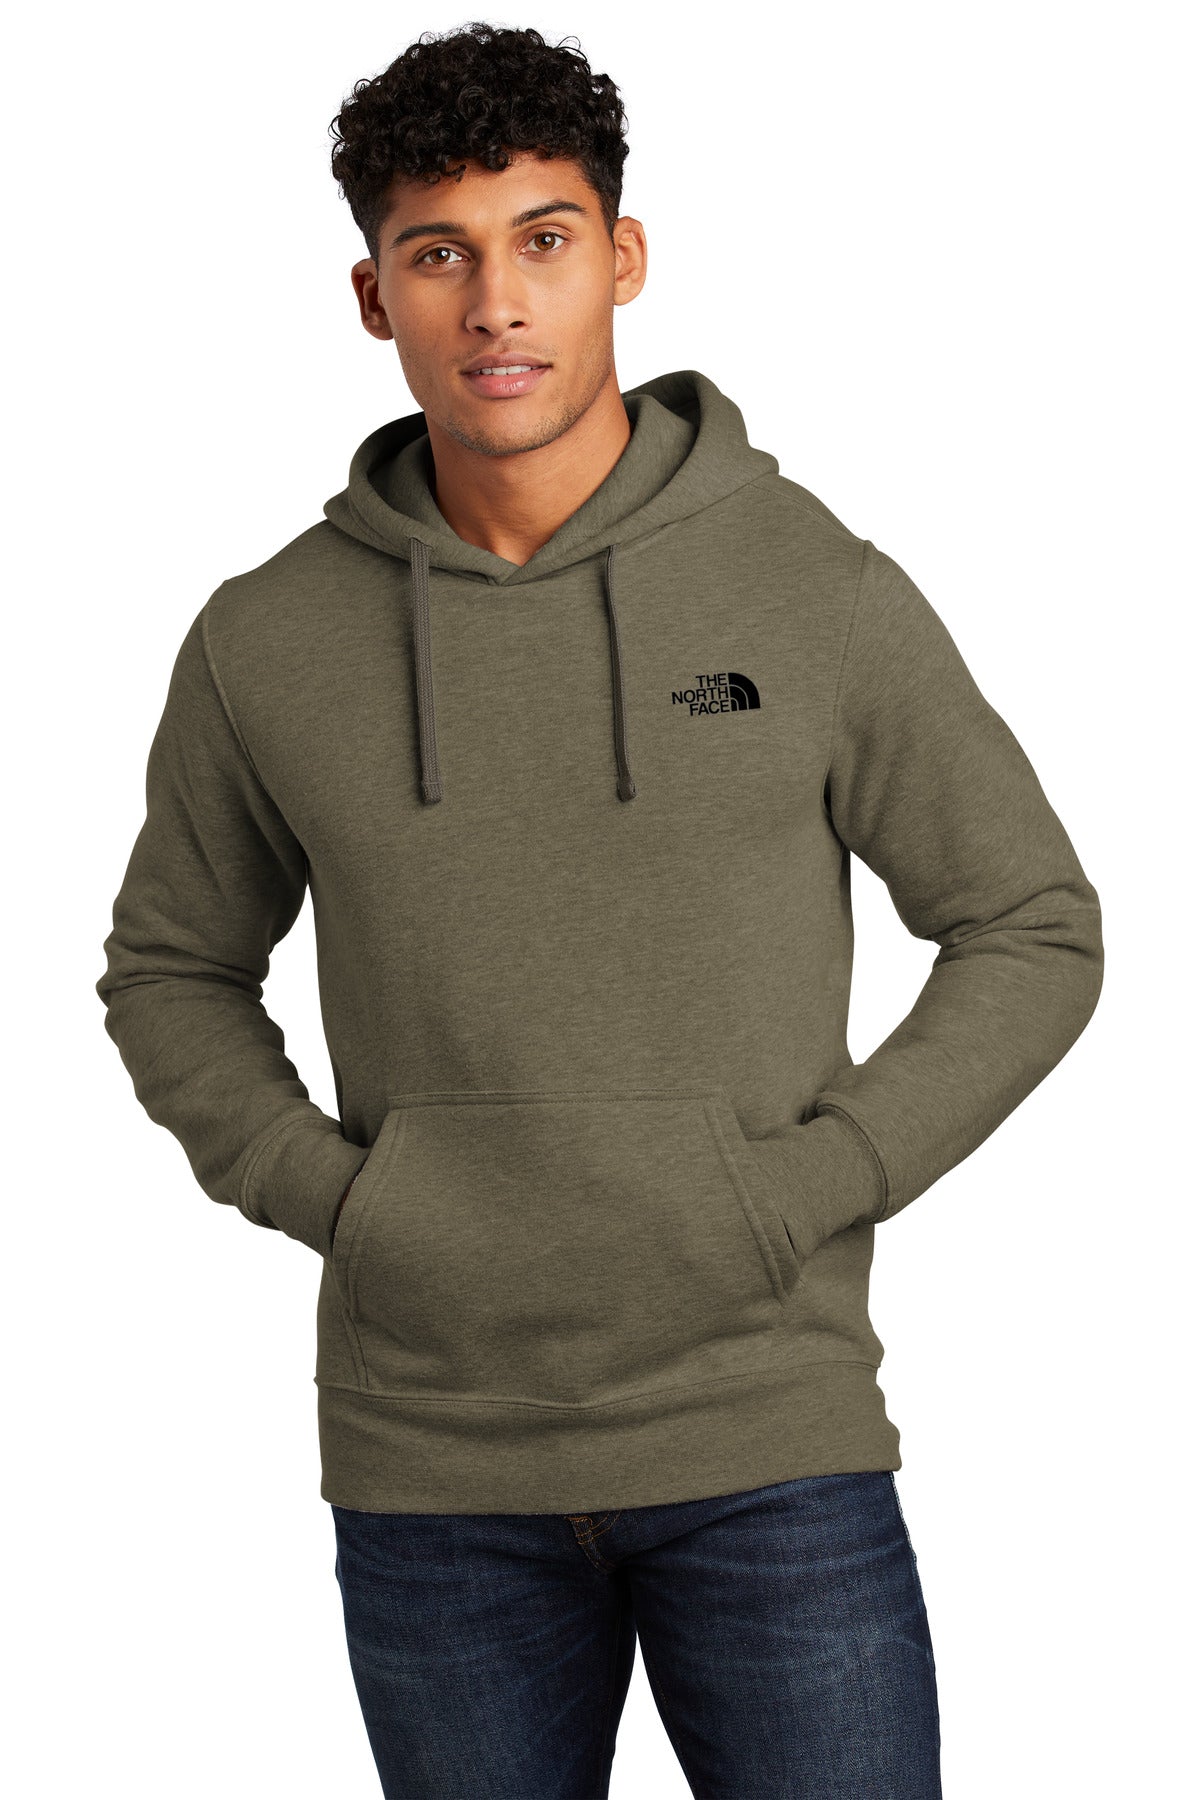 Sweatshirts/Fleece New Taupe Green Heather The North Face